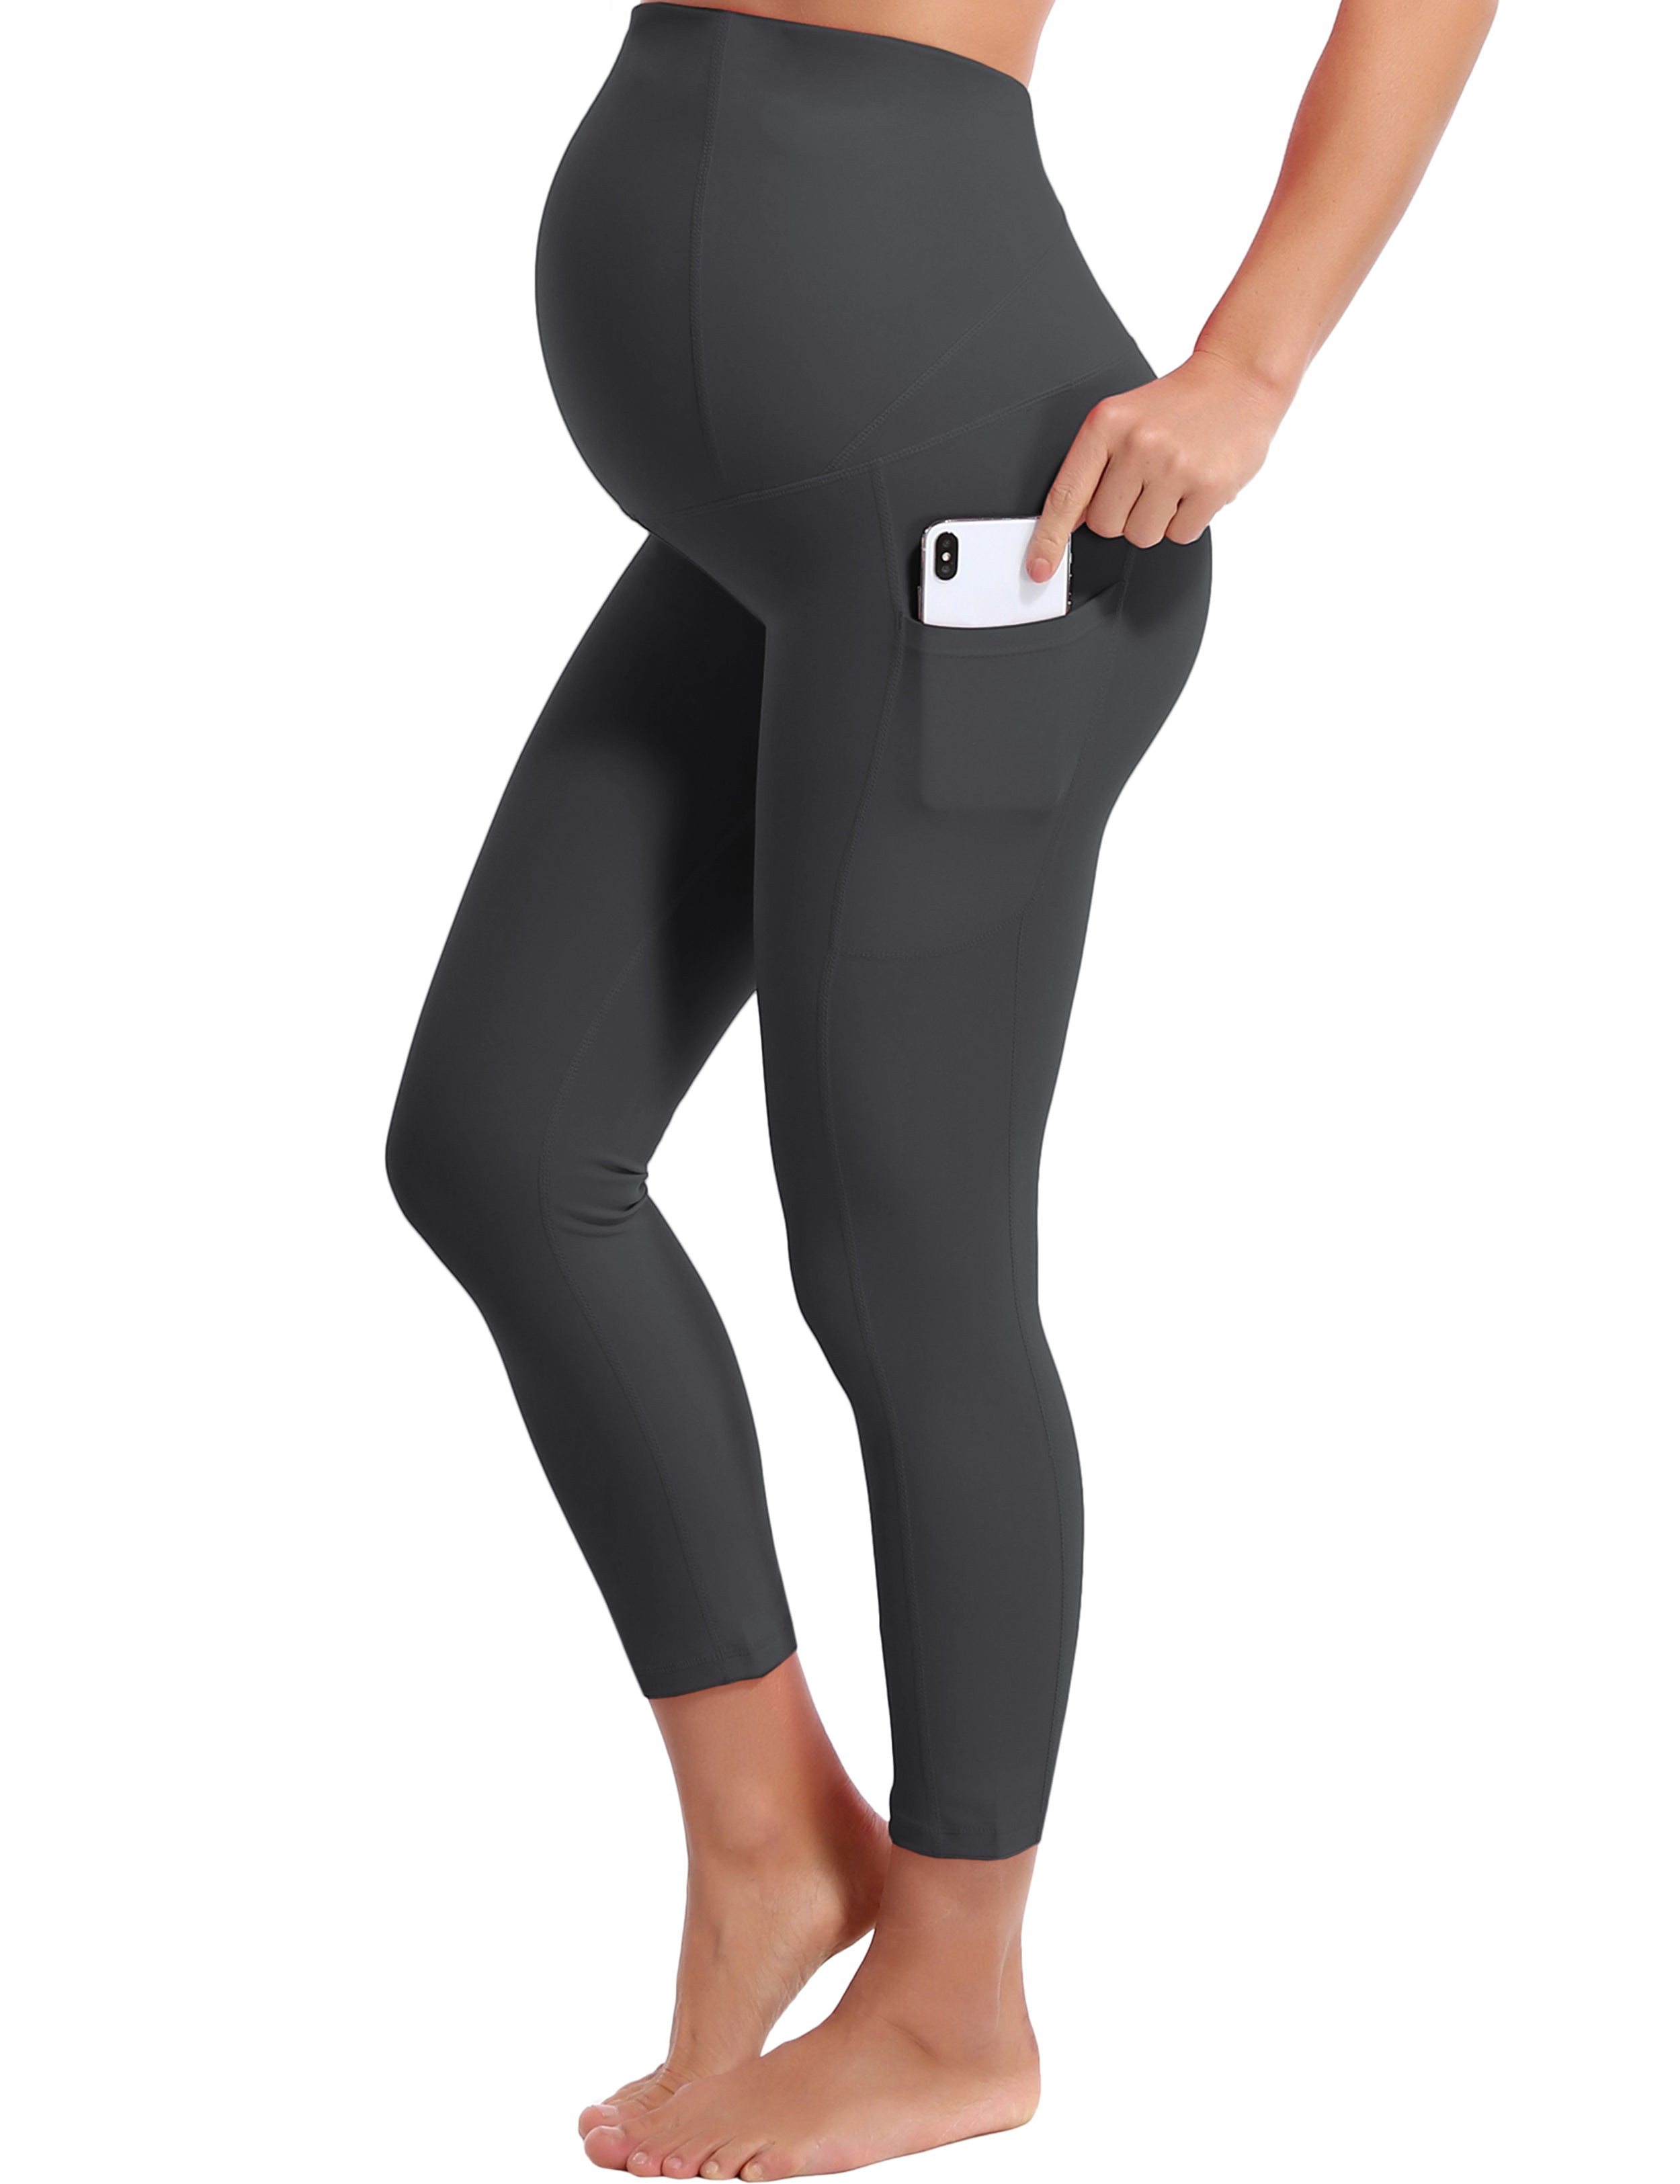 22" Side Pockets Maternity Gym Pants shadowcharcoal 87%Nylon/13%Spandex Softest-ever fabric High elasticity 4-way stretch Fabric doesn't attract lint easily No see-through Moisture-wicking Machine wash